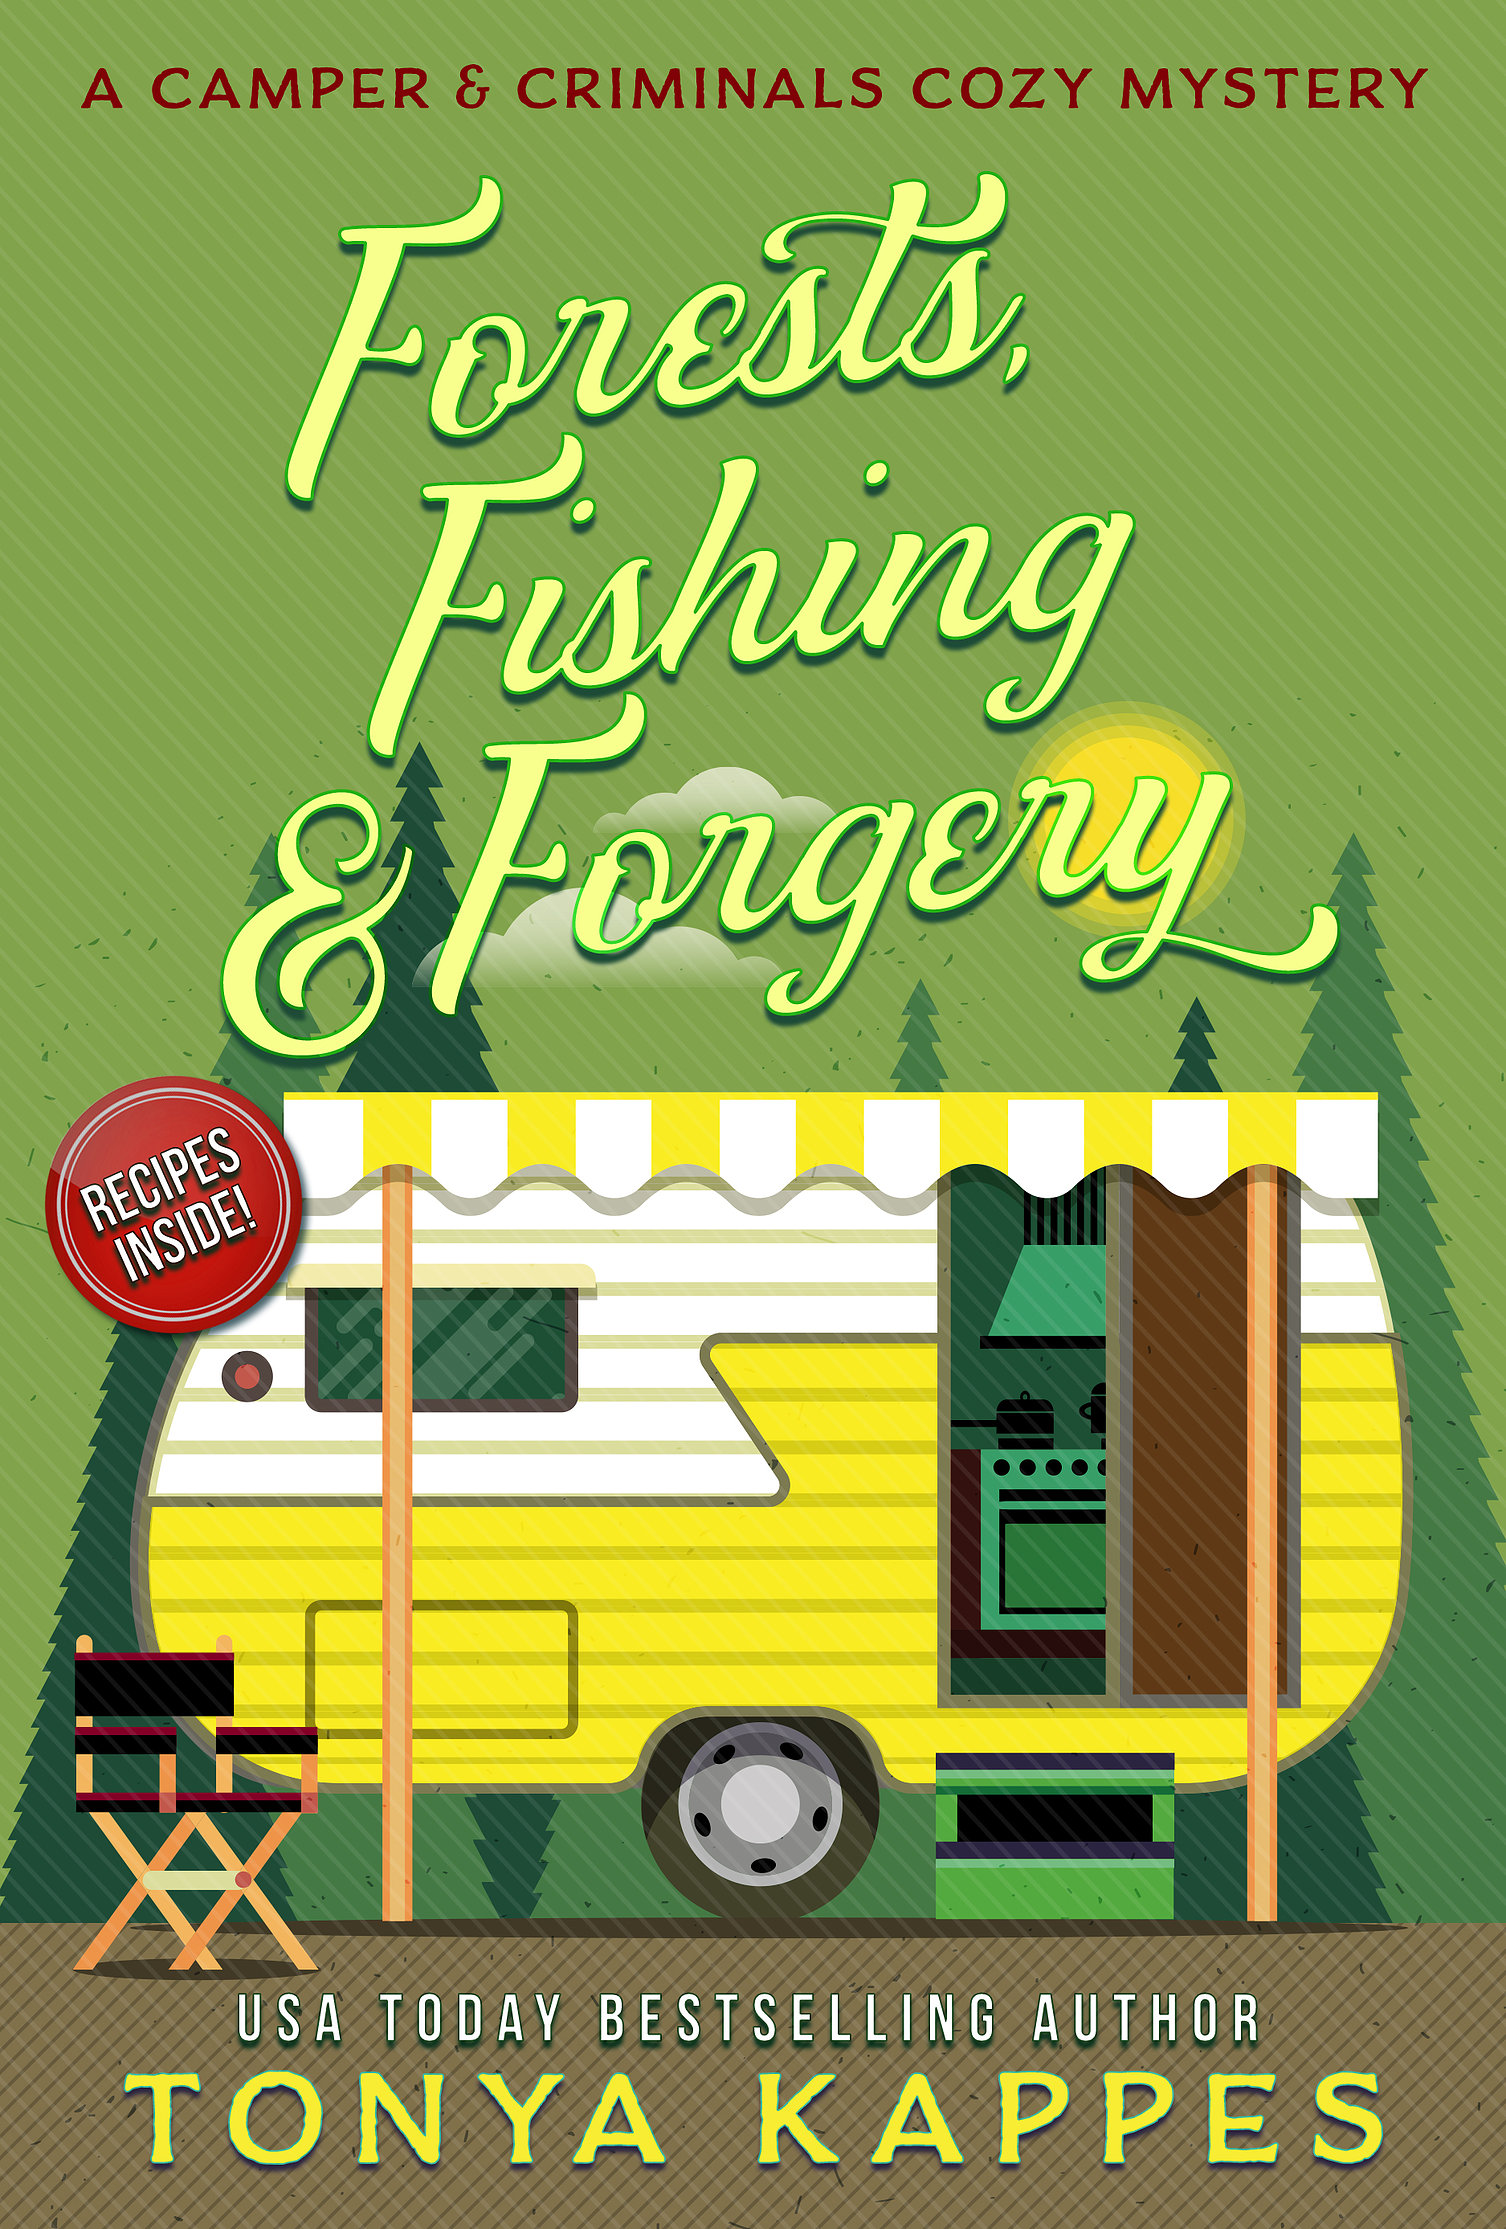 bøf Løve Norm Forests Fishing & Forgery by Tonya Kappes - Baroness' Book Trove